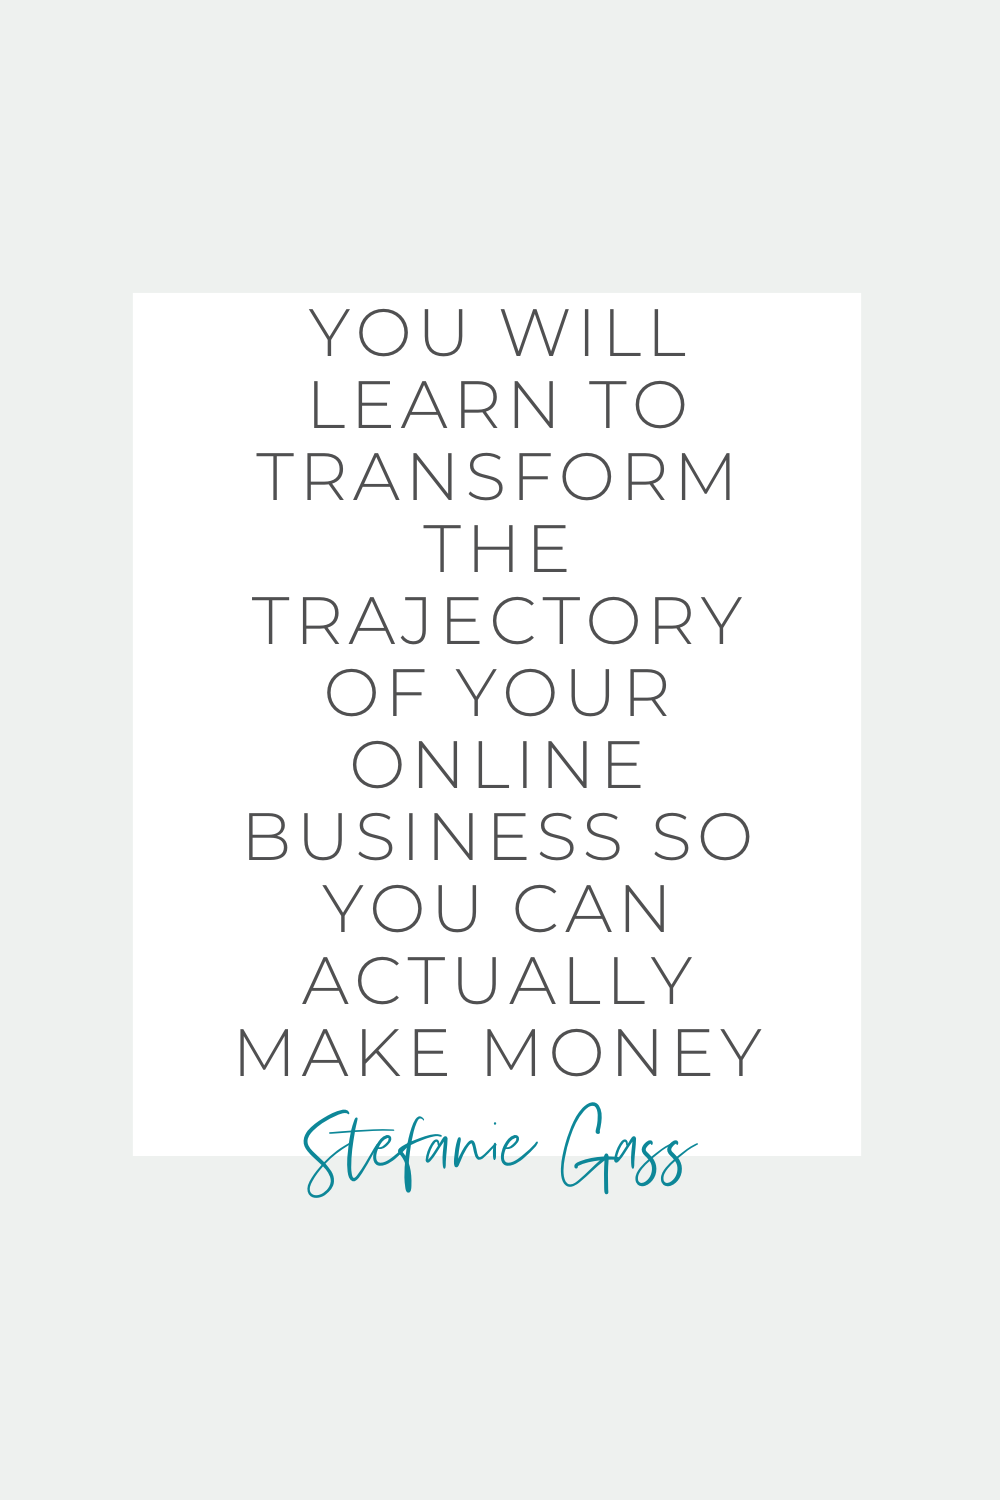 Text on graphic states "you will learn to transform the trajectory of your online business so you can actually make money." Stefanie Gass